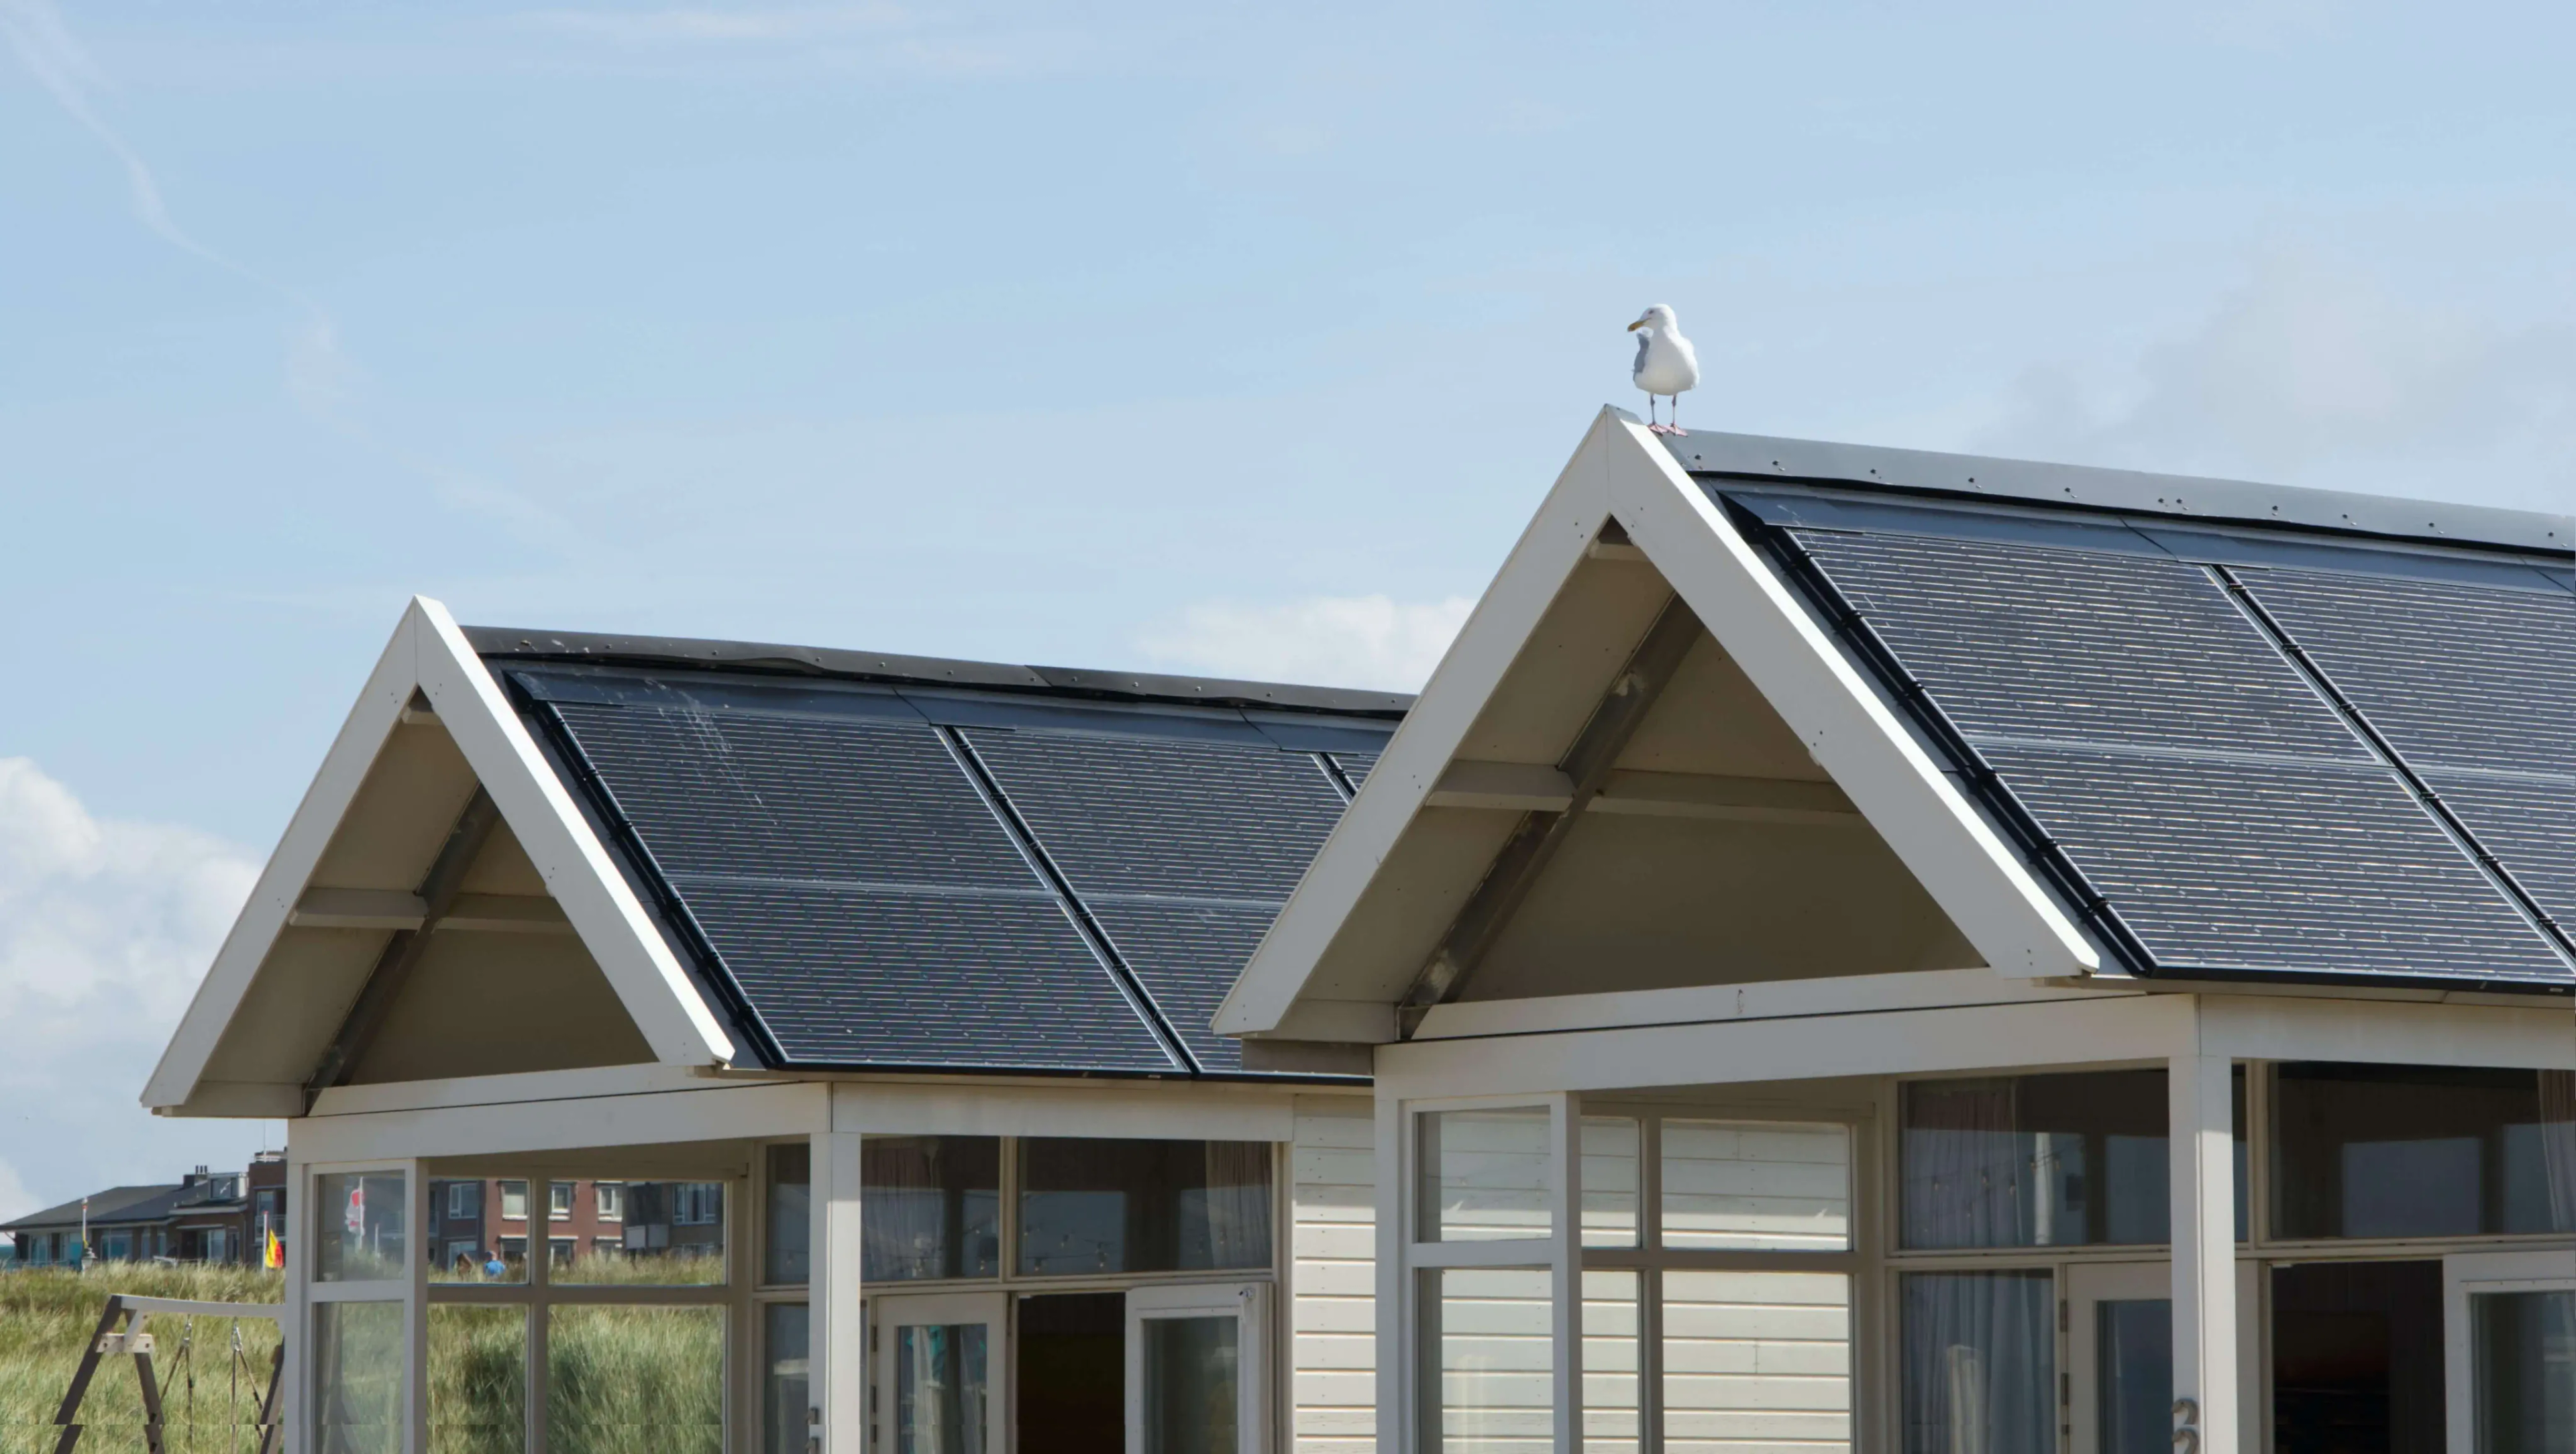 Solar panels on a home with a seagull perched on the ridge